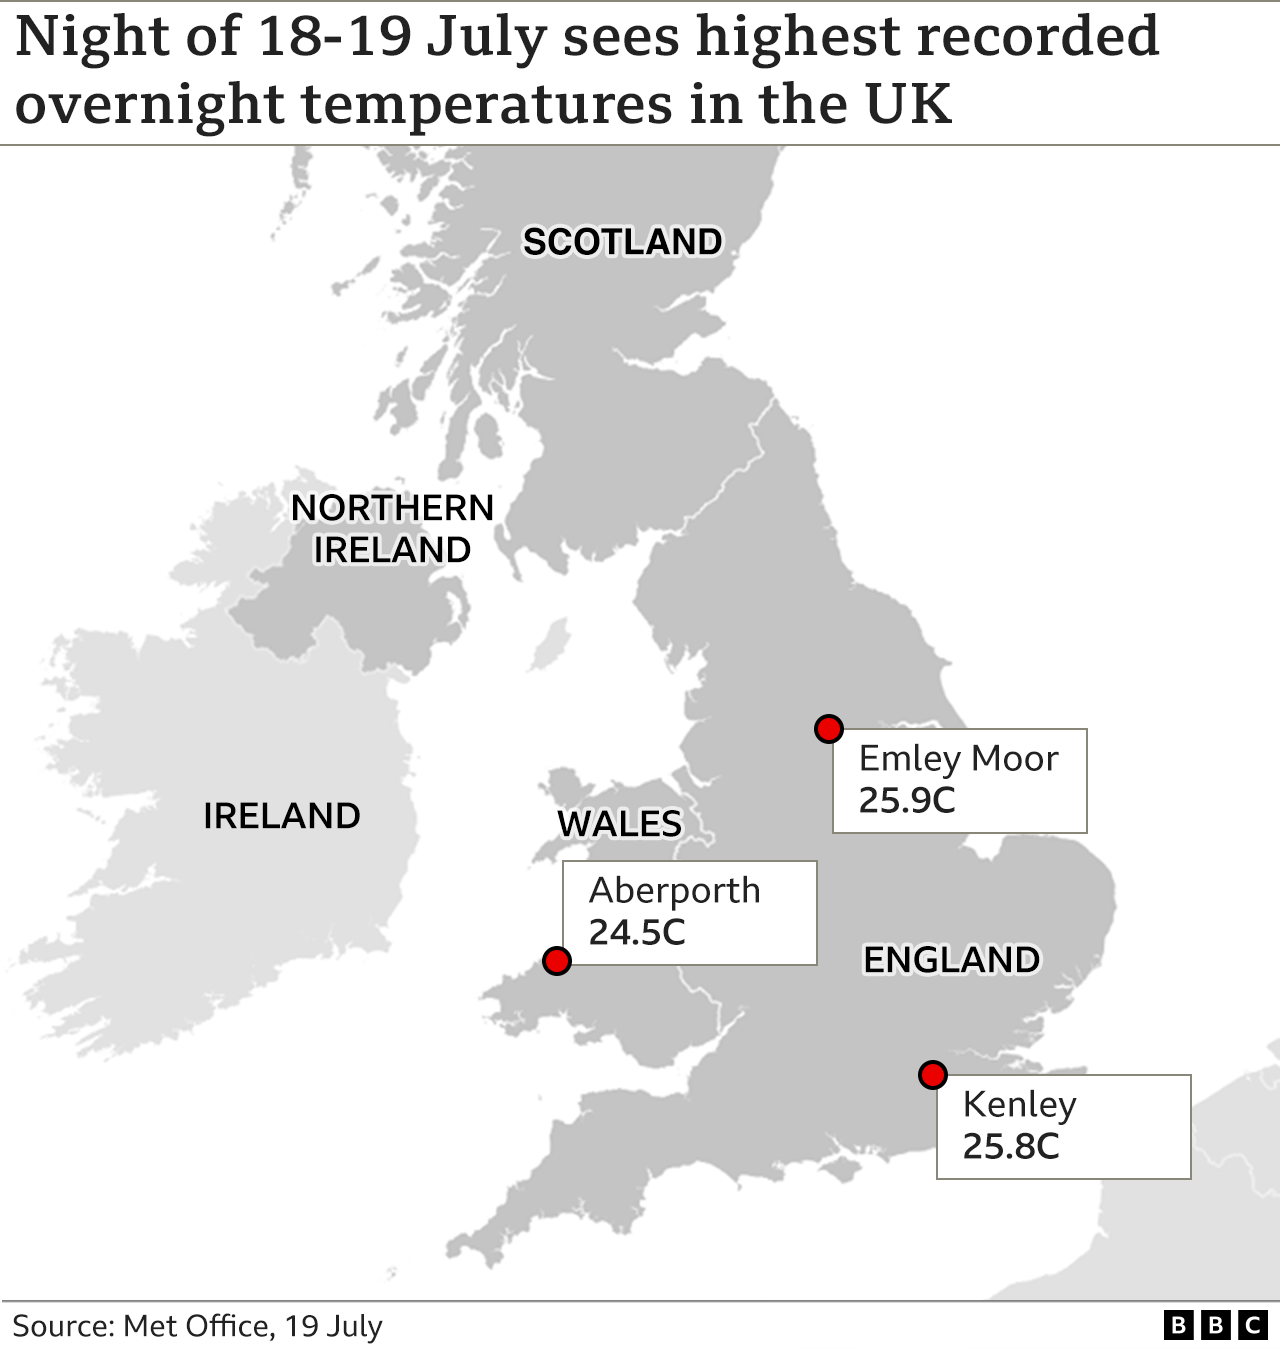 Map showing overnight temperatures on 18-19 July